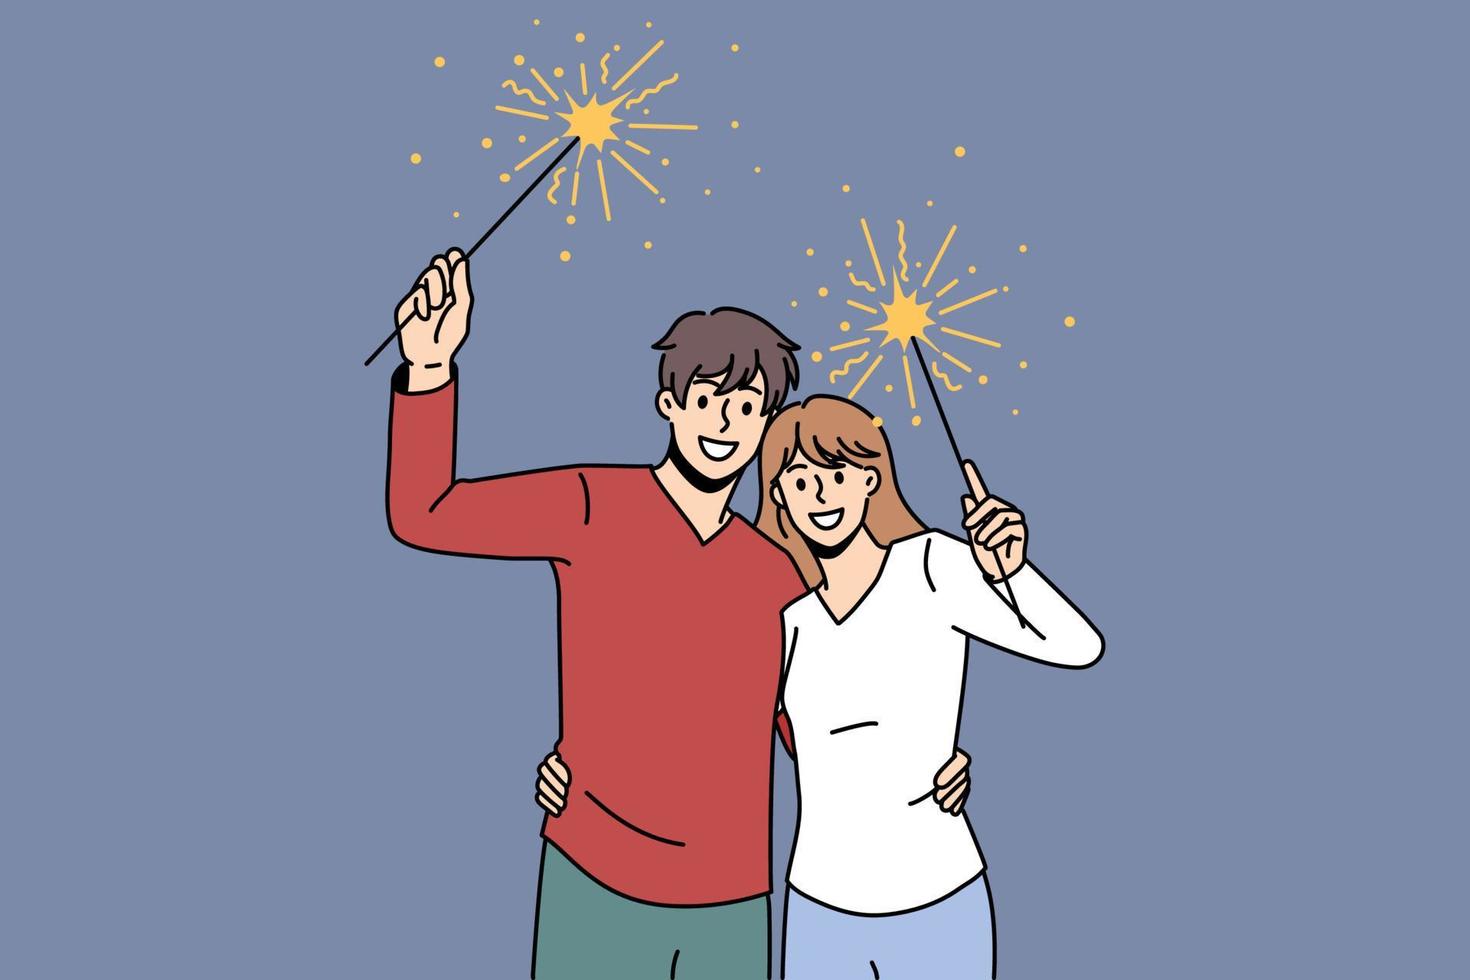 Happy couple lovers with festive fireworks hug cuddle celebrate New Year together. Smiling man and woman with lights enjoy Christmas party or celebration. Winter holiday. Vector illustration.